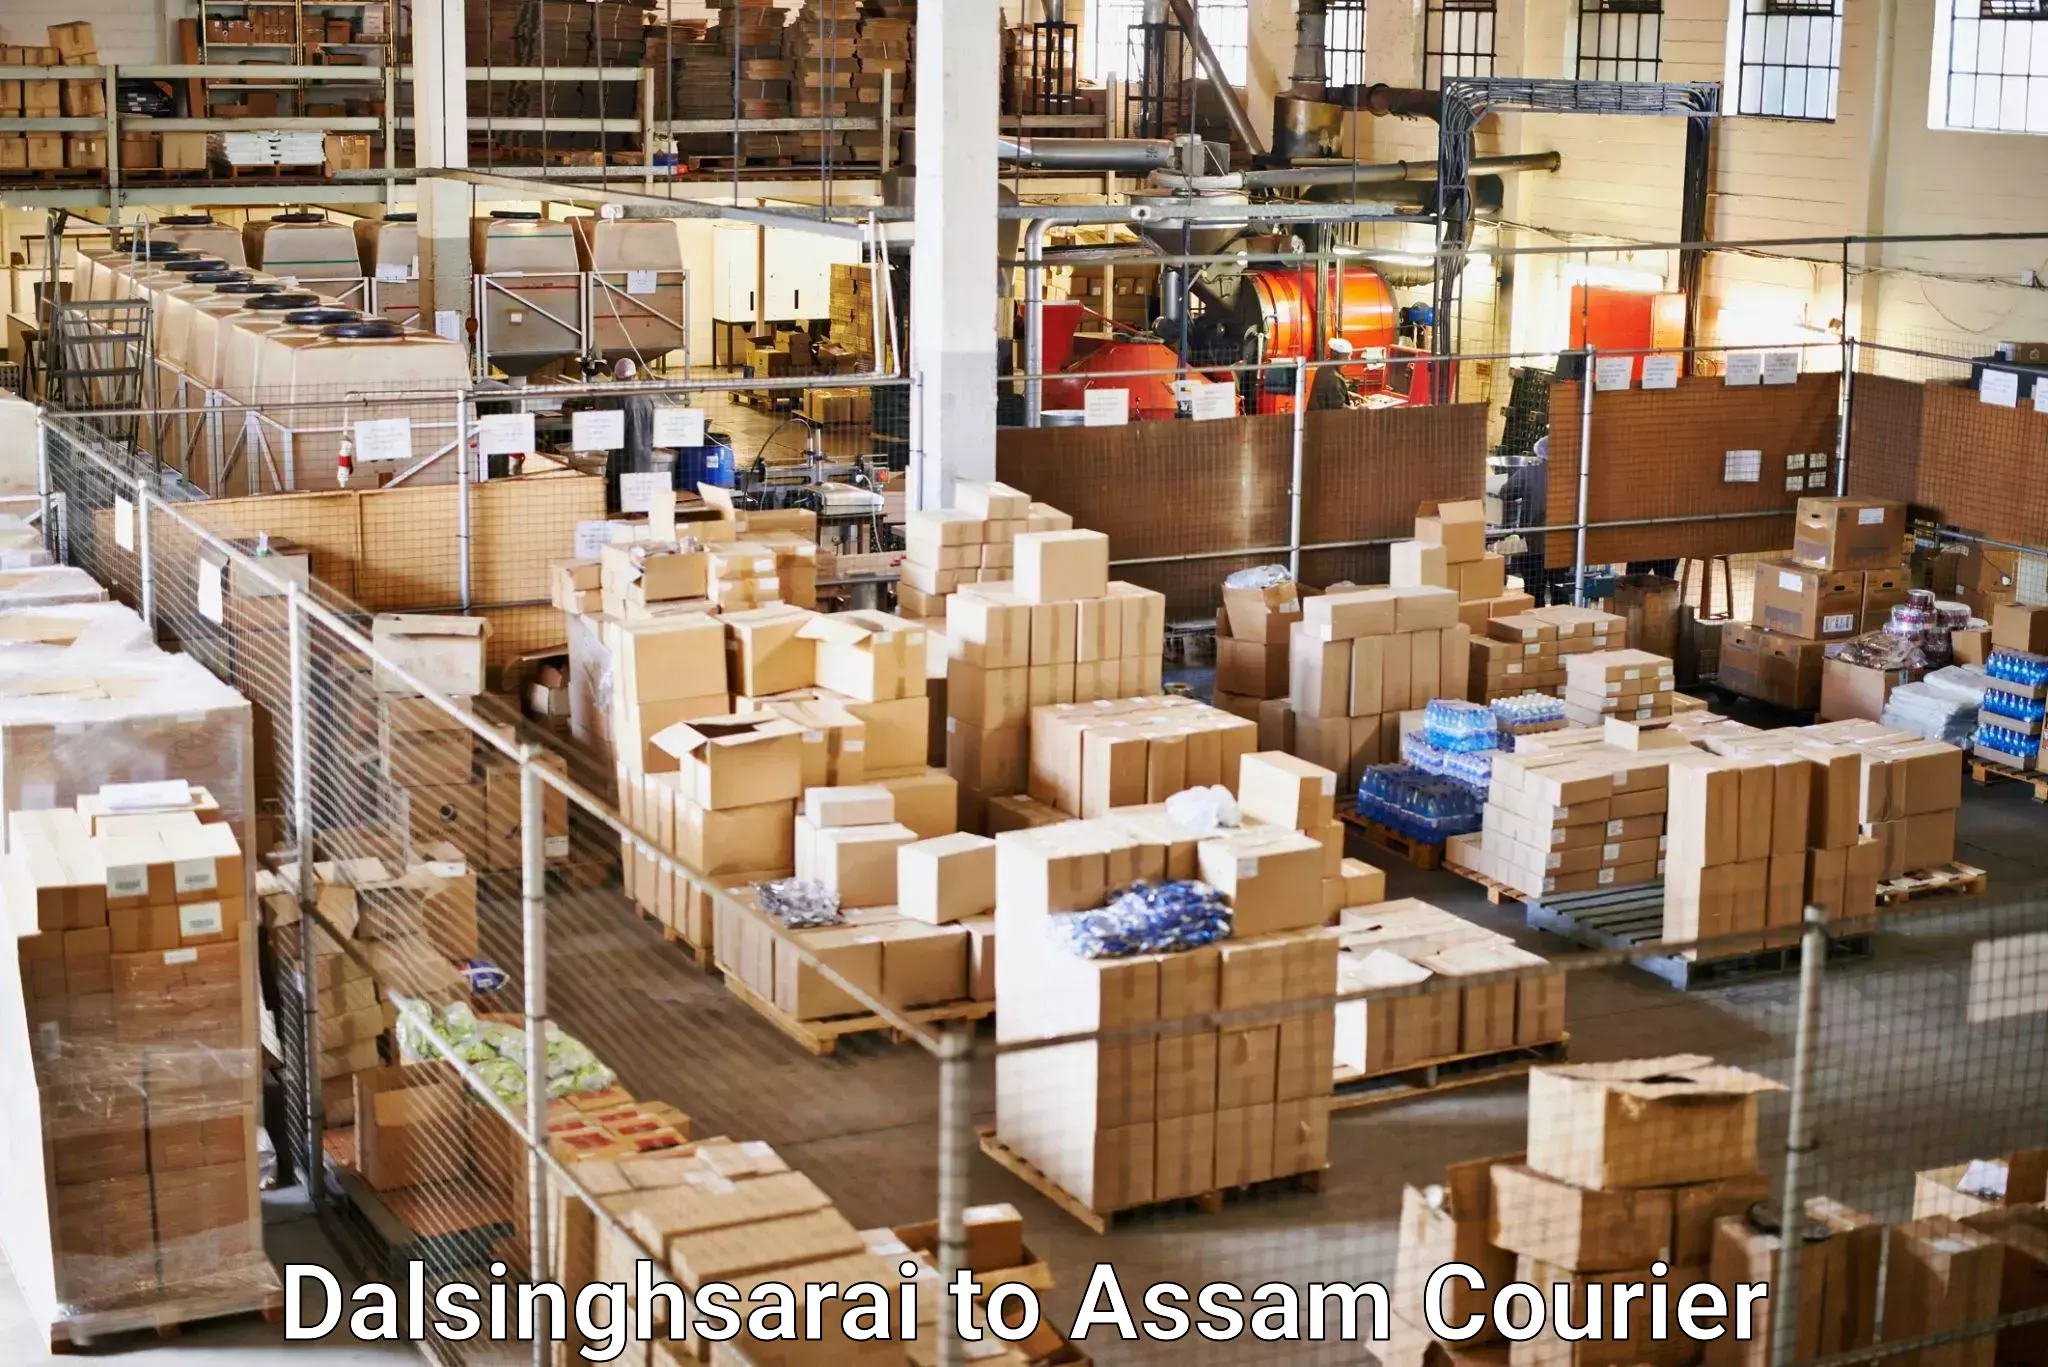 Business shipping needs in Dalsinghsarai to Dhakuakhana